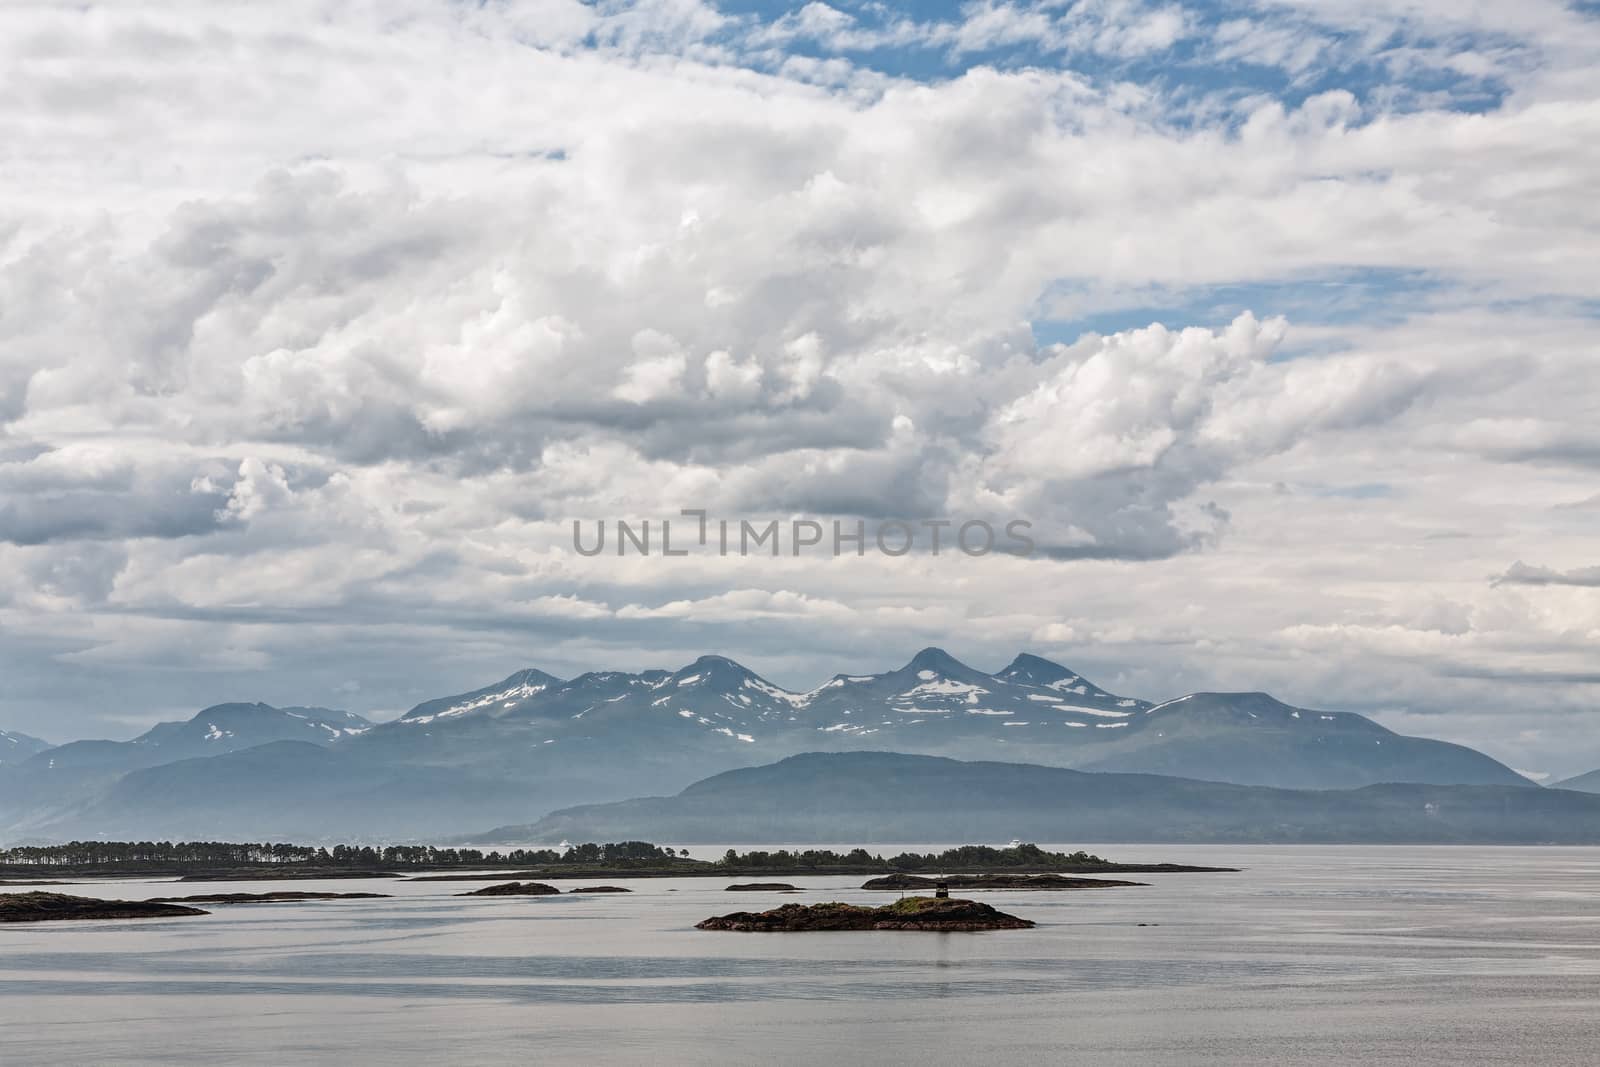 Mountain view with some islands in the fjord in Molde, Norway by LuigiMorbidelli